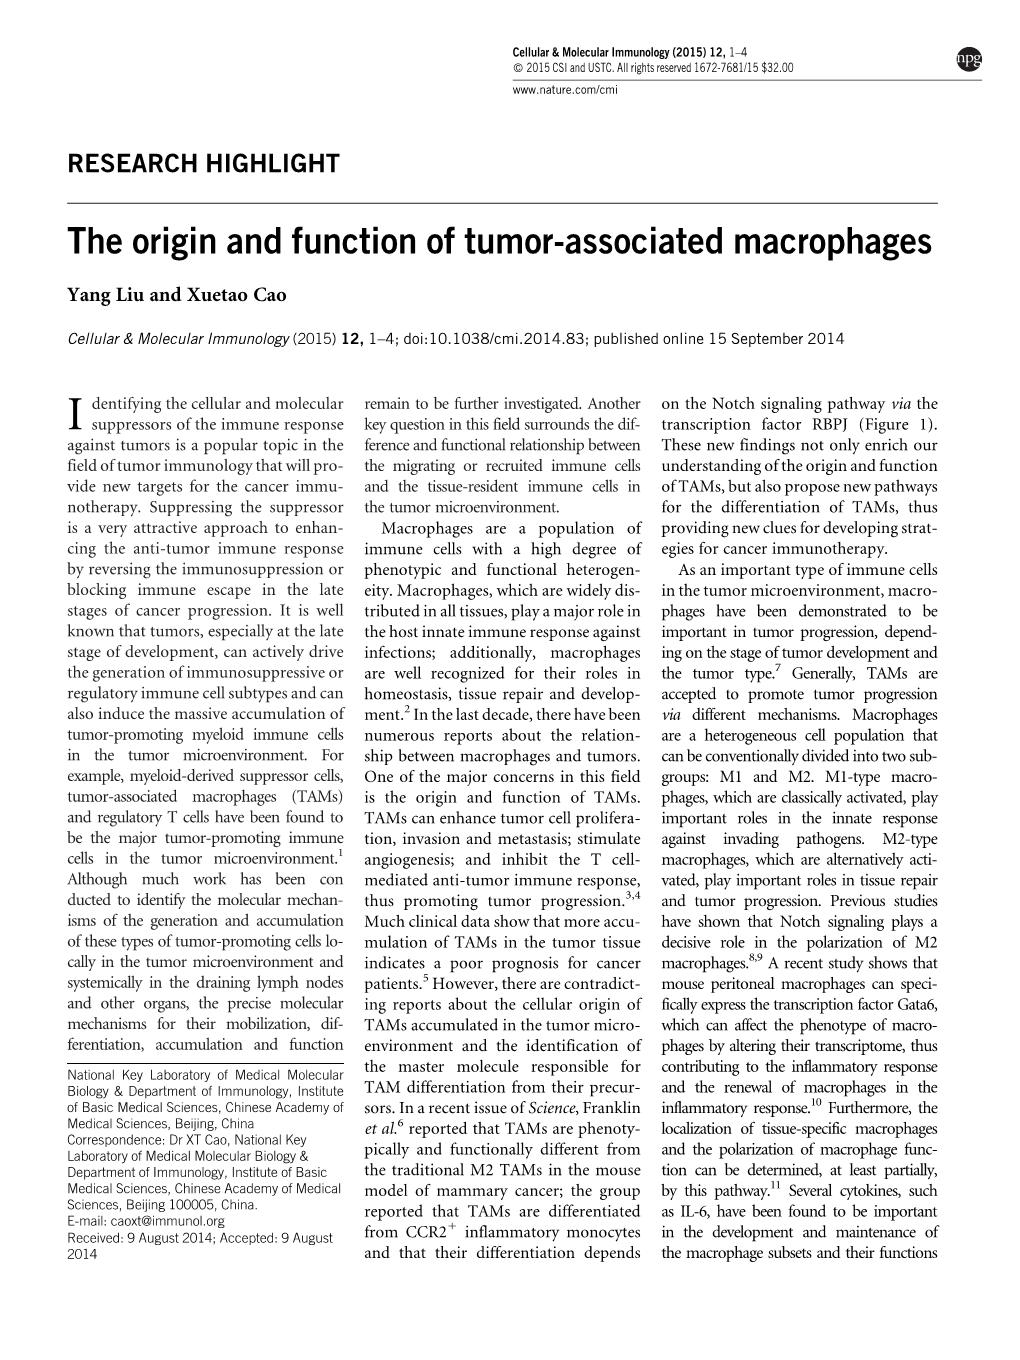 The Origin and Function of Tumor-Associated Macrophages